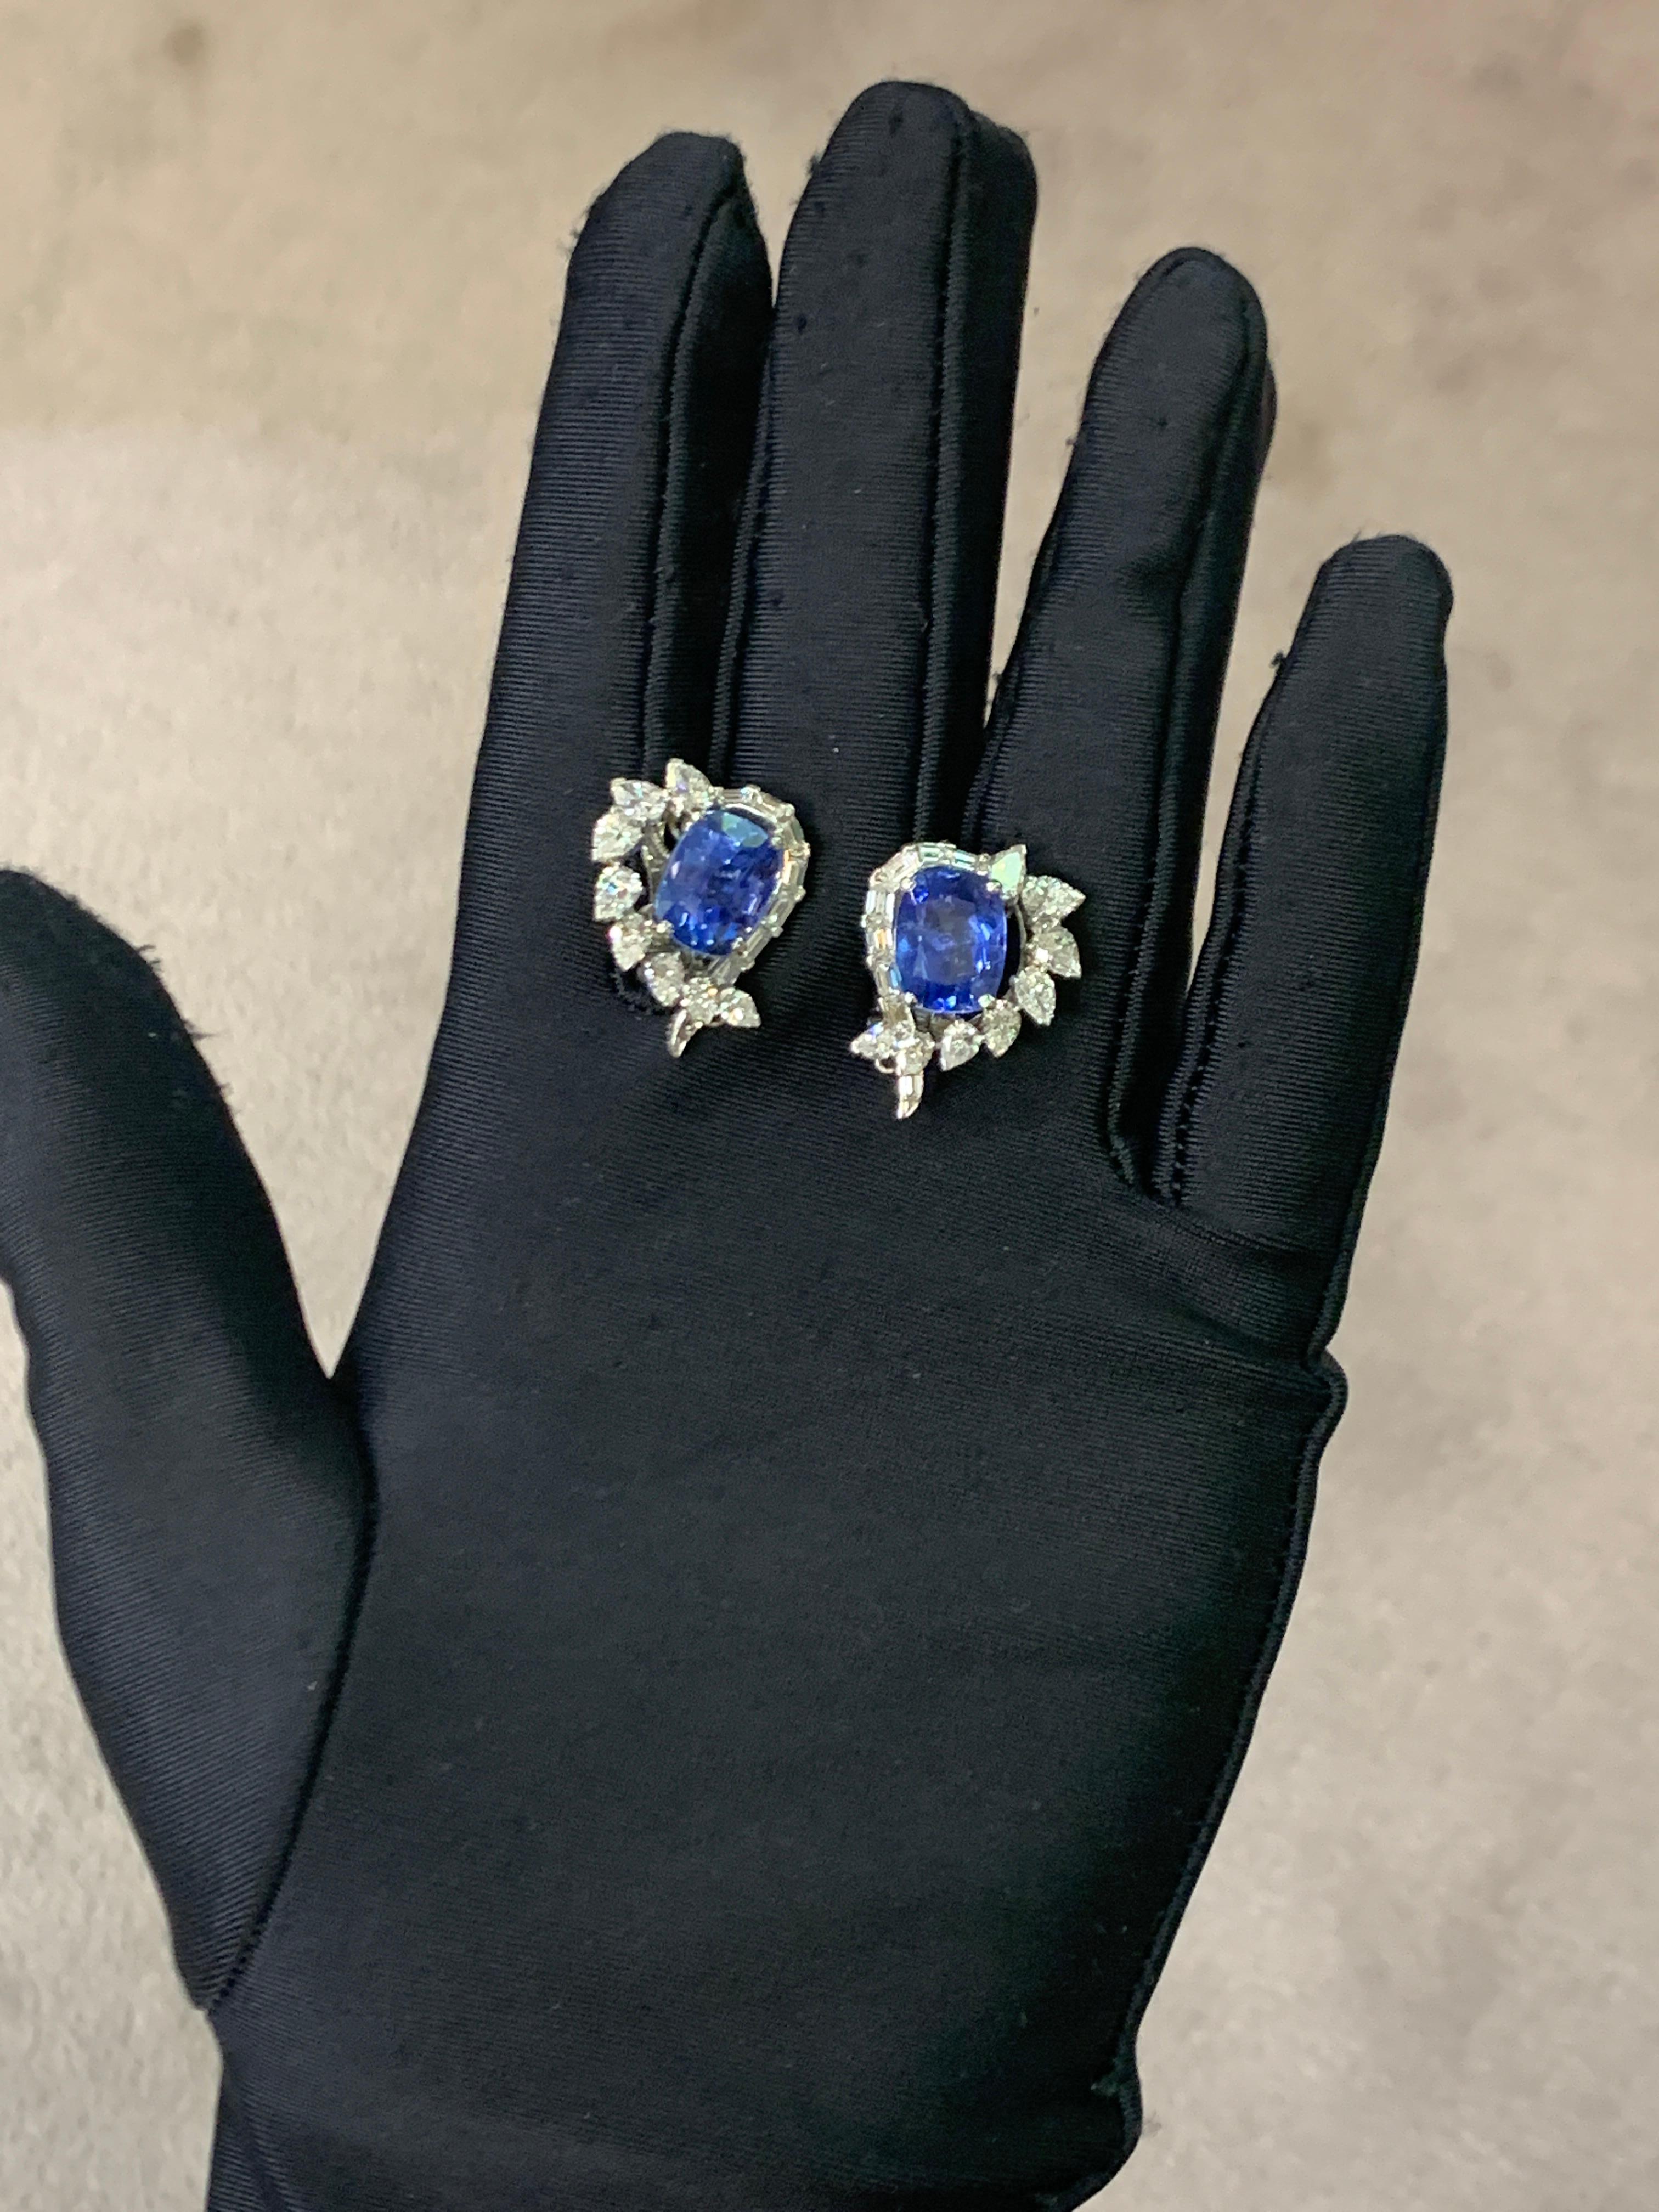 Oscar Heyman Brothers Certified Natural Sapphire and Diamond Earrings  In Excellent Condition For Sale In New York, NY